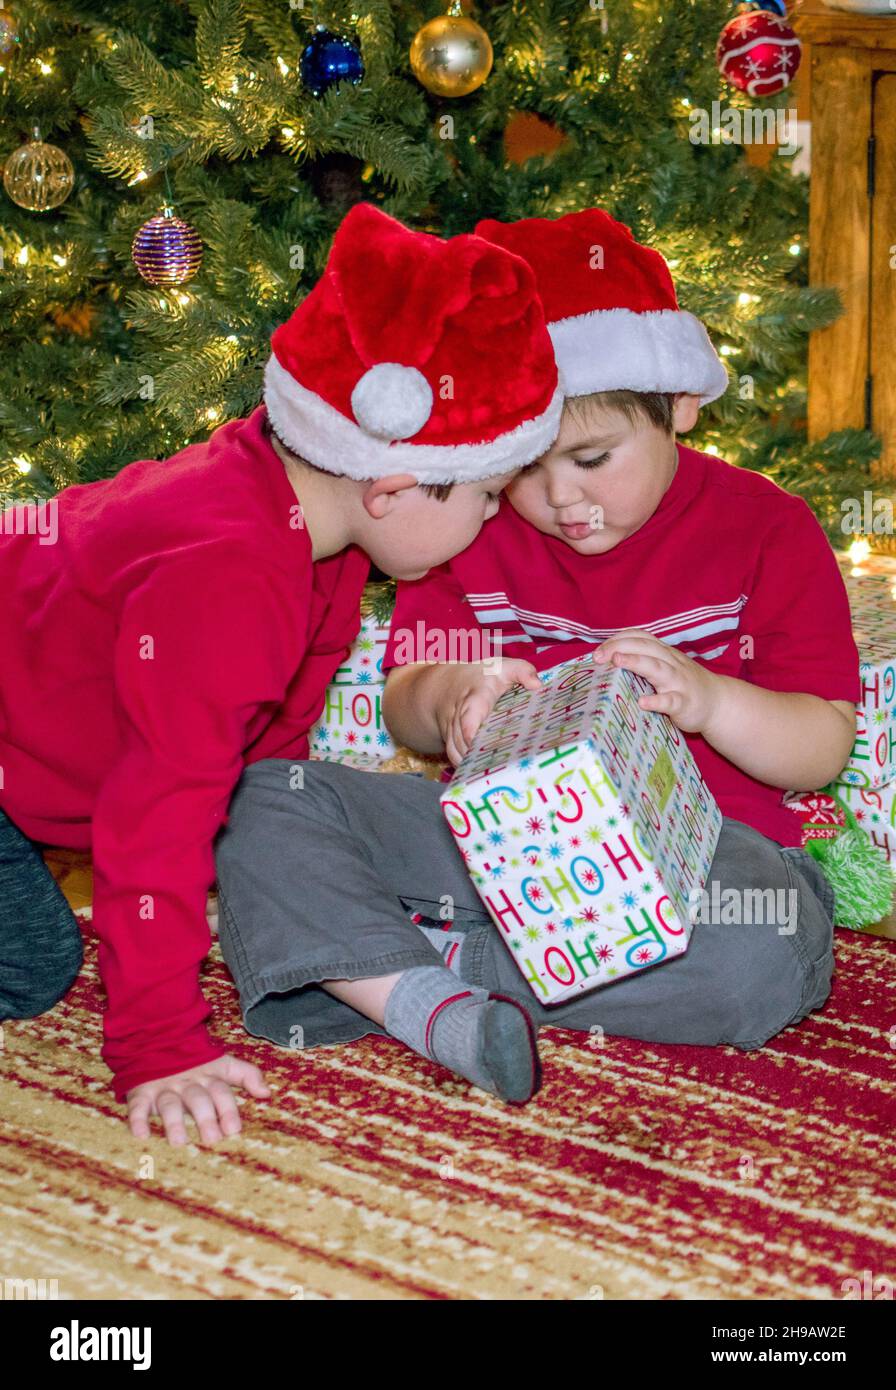 A brother checks out the gift his sibling is opening. Stock Photo